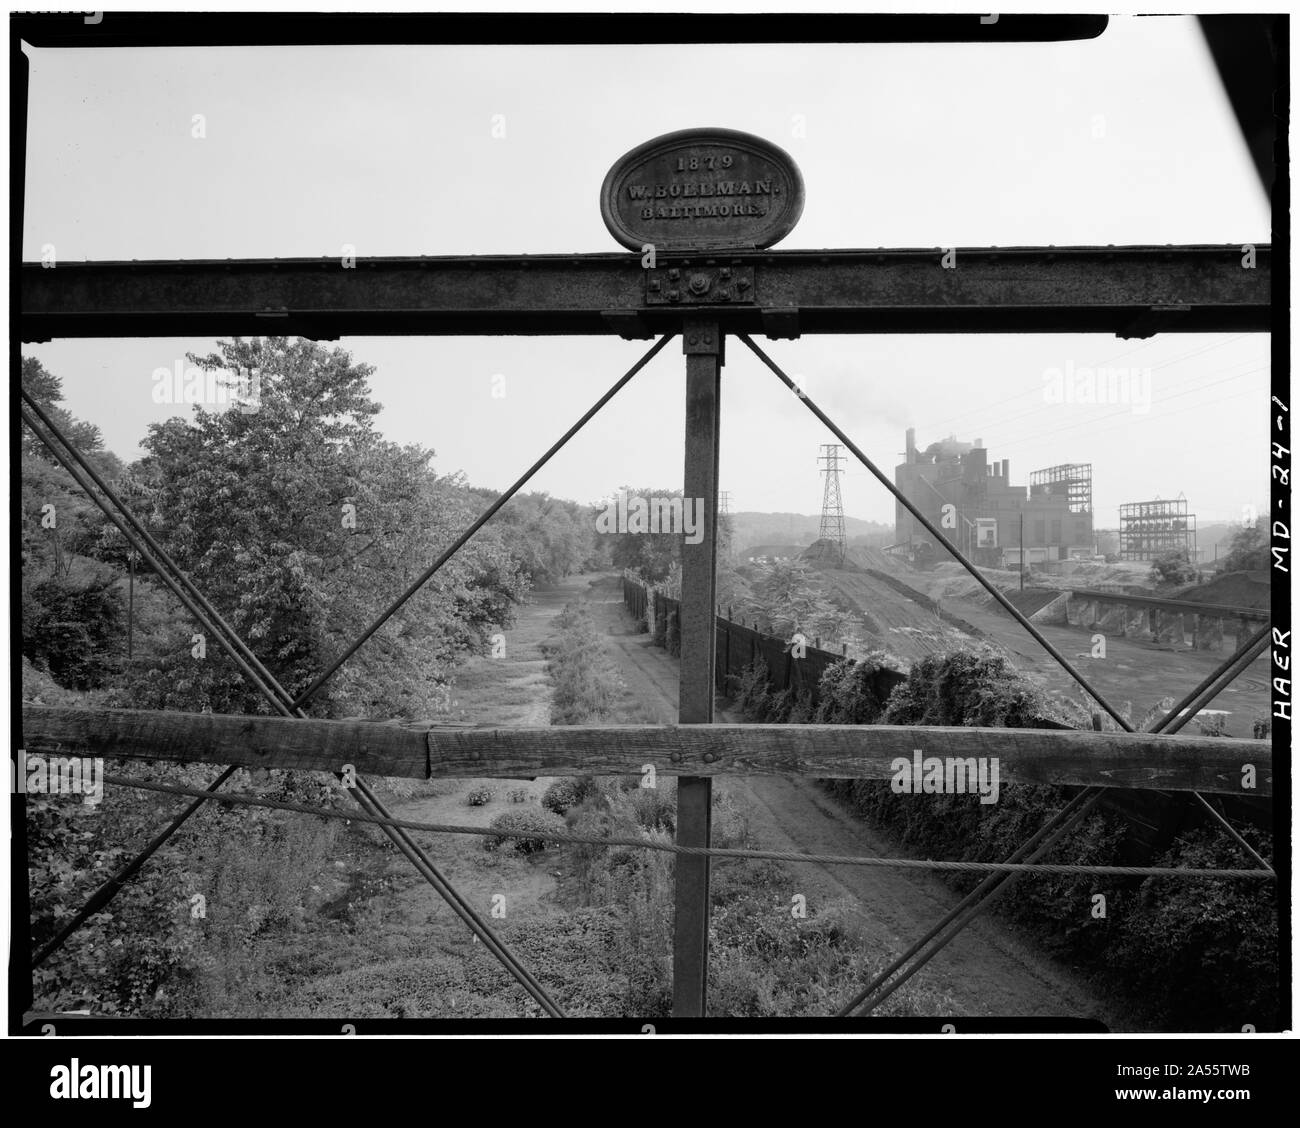 VIEW OF CAST-IRON MAKER'S PLATE, BOLTED TO TOP CHORD OF BRIDGE, MARKED '1879, W. BOLLMAN, BALTIMORE.' - Salisbury Street Bridge, Spanning CandO Canal (Milepost 99.65) and WM Railroad, Williamsport, Washington County, MD Stock Photo